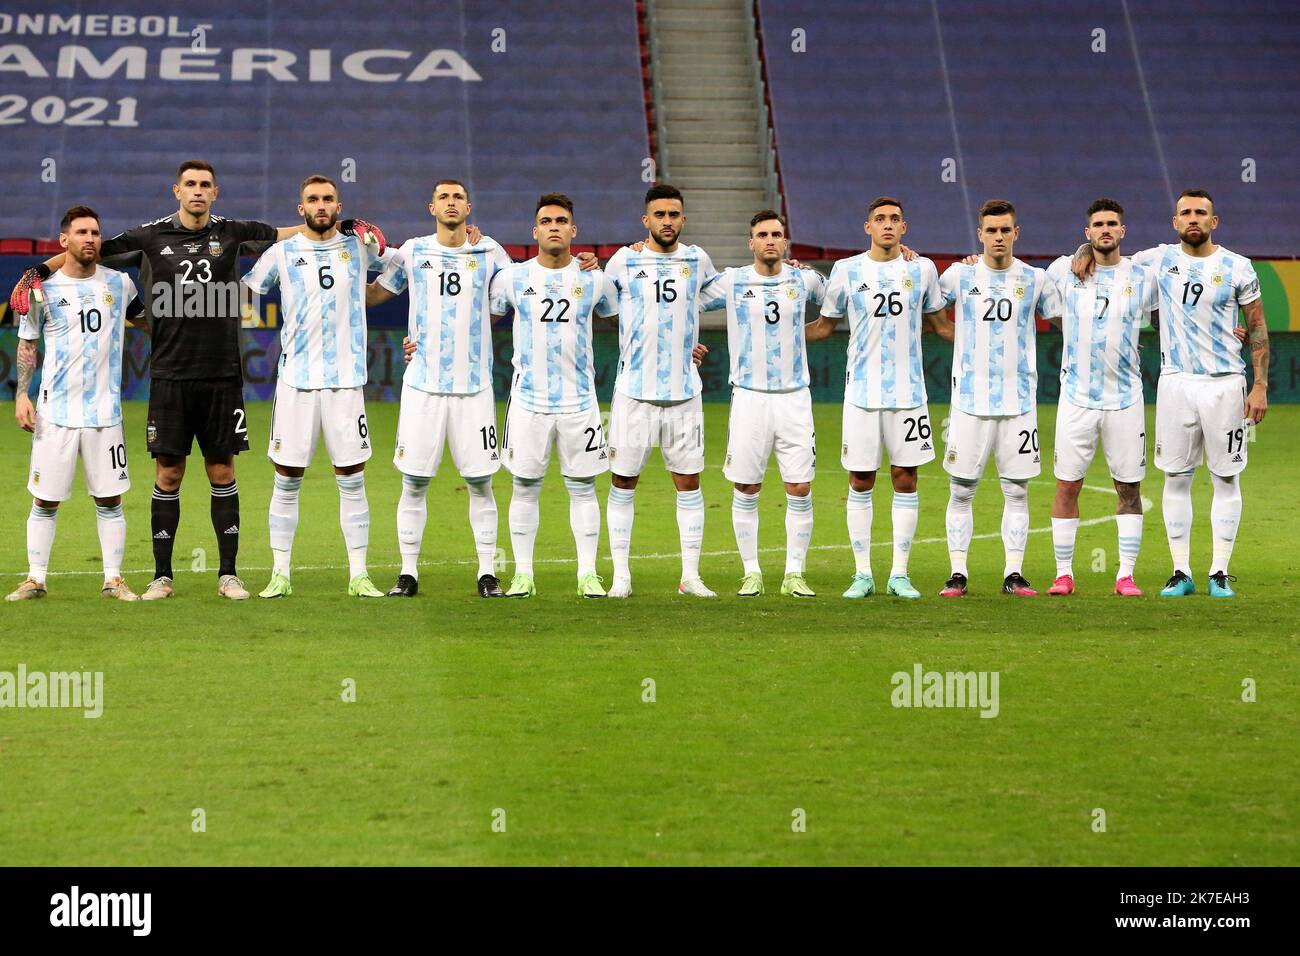 ©Laurent Lairys/MAXPPP - Team Argentina during the Copa America 2021, semi-final football match between Argentina and Colombia on July 6, 2021 at Estádio Nacional Mané Garrincha in Brasilia, Brazil photos Laurent Lairys /MAXPPP Stock Photo